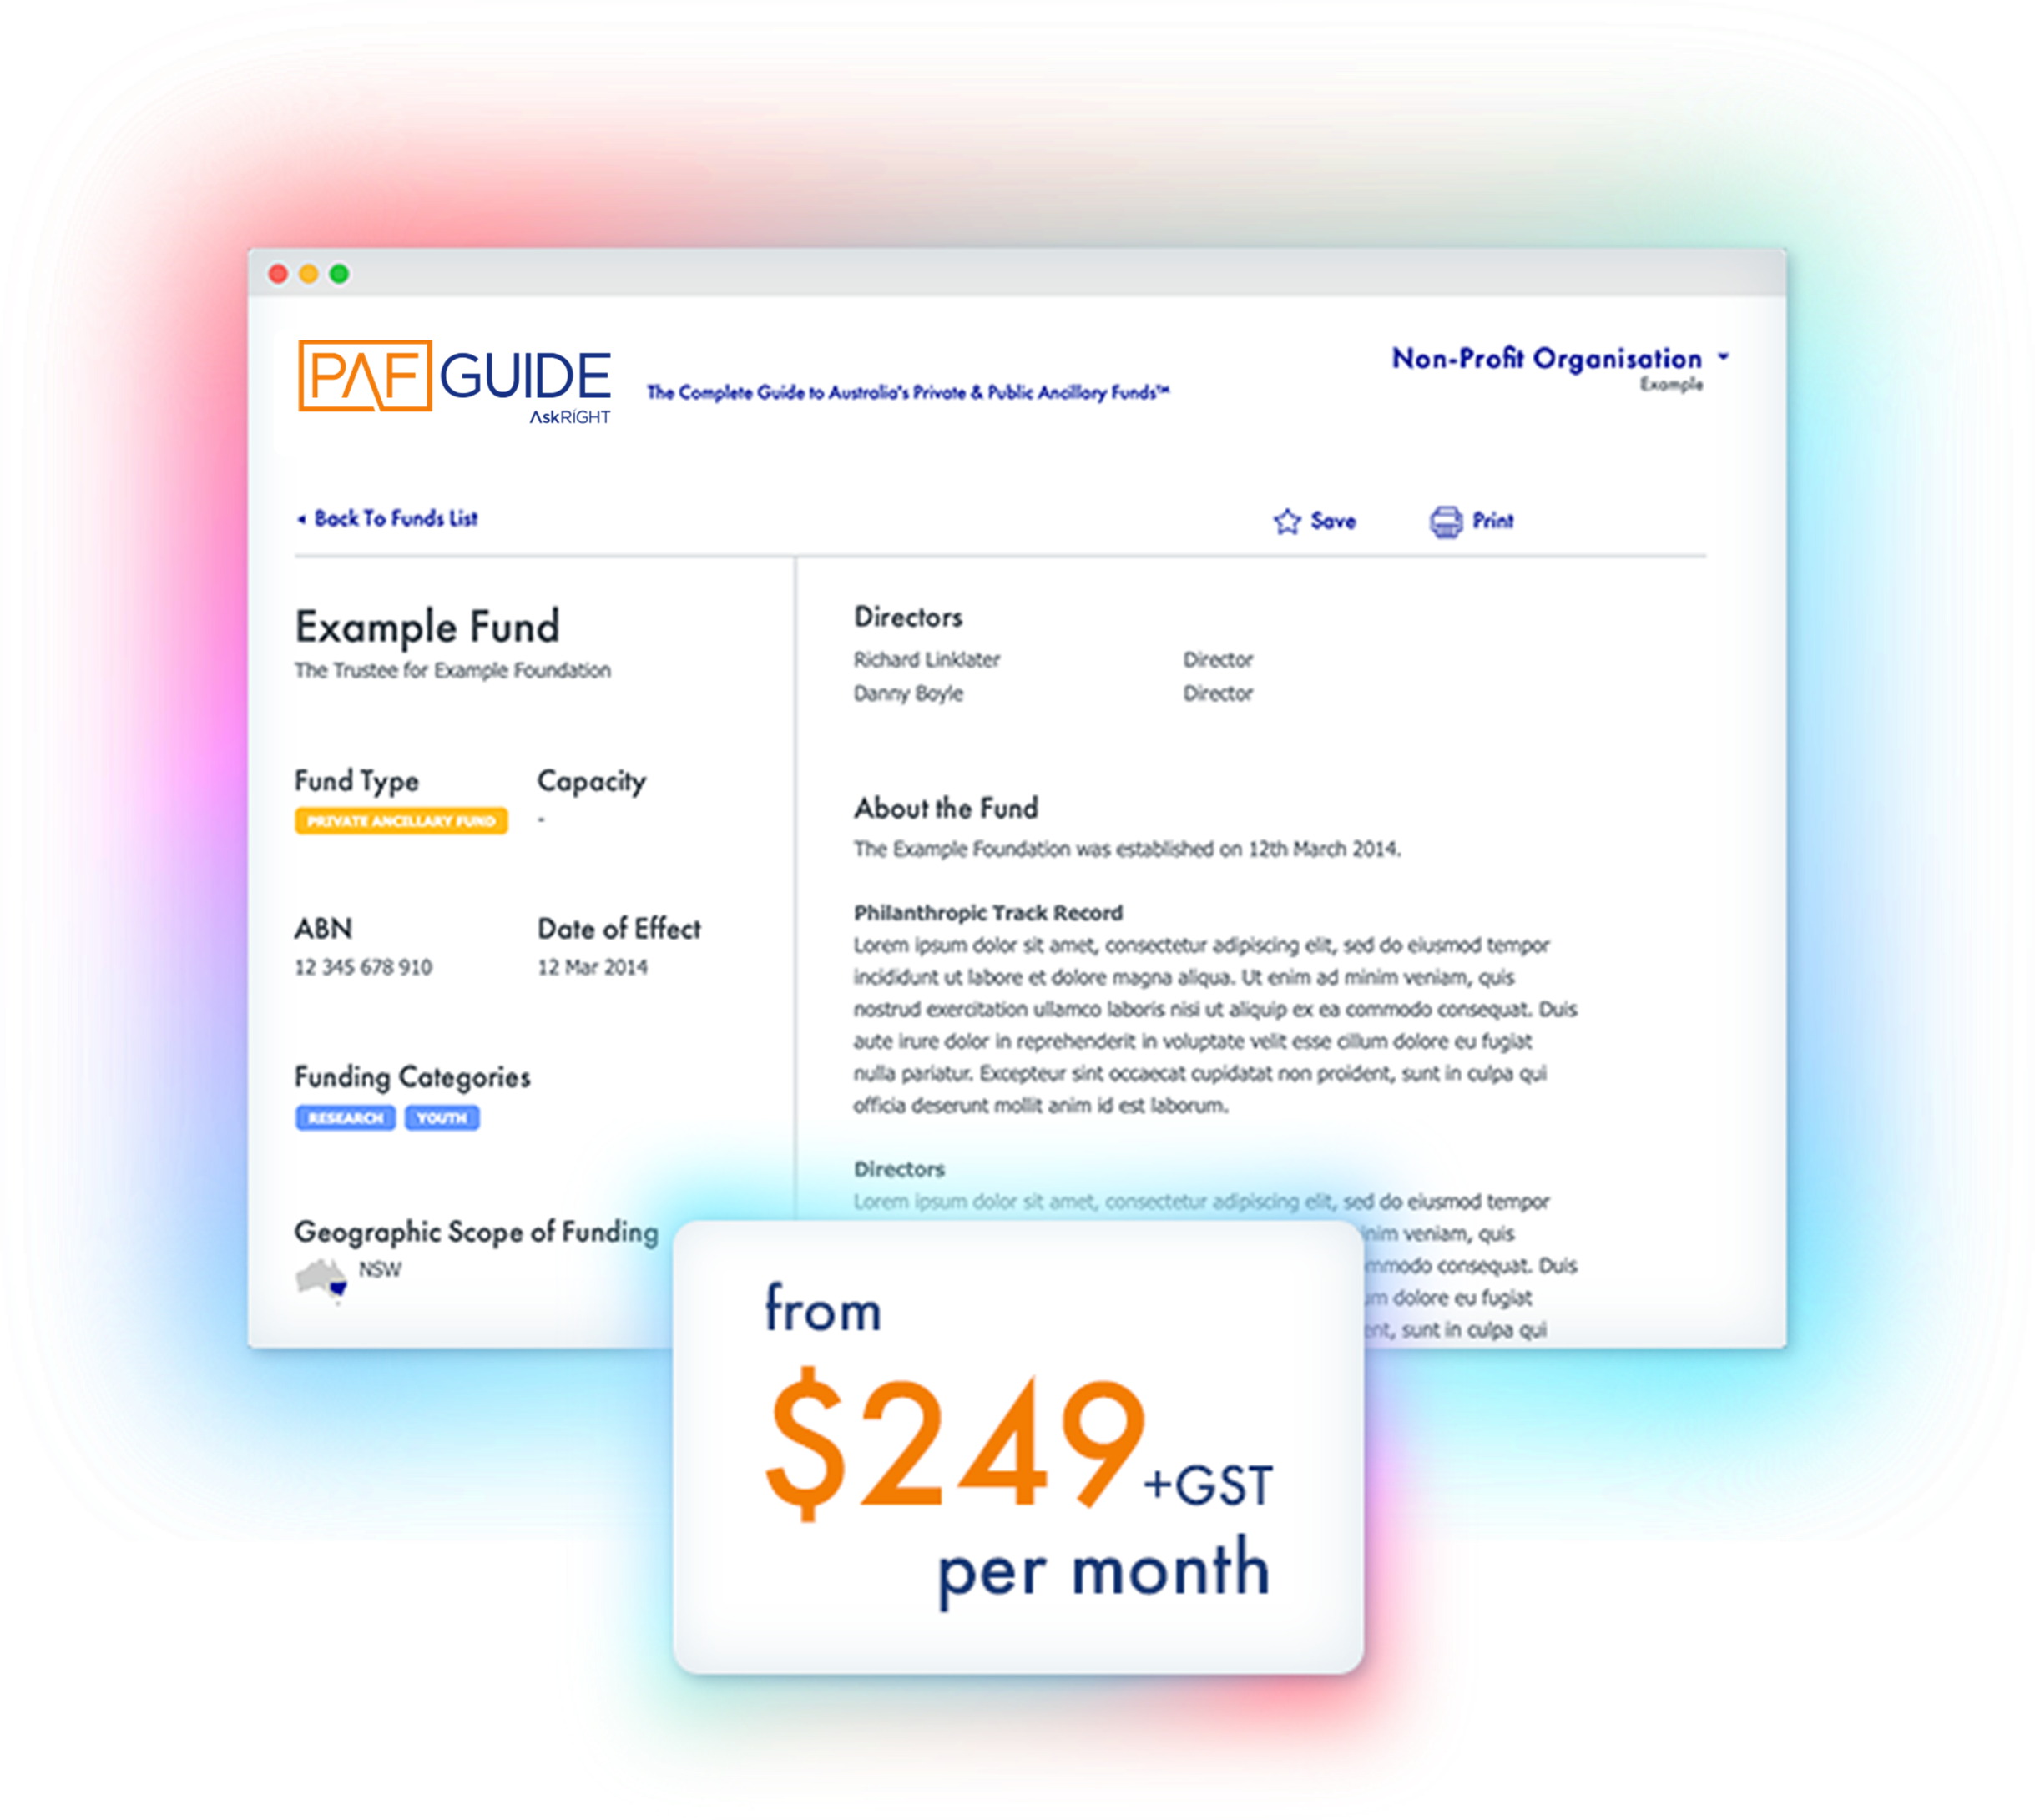 PAF Guide pricing - from $249 +GST per month